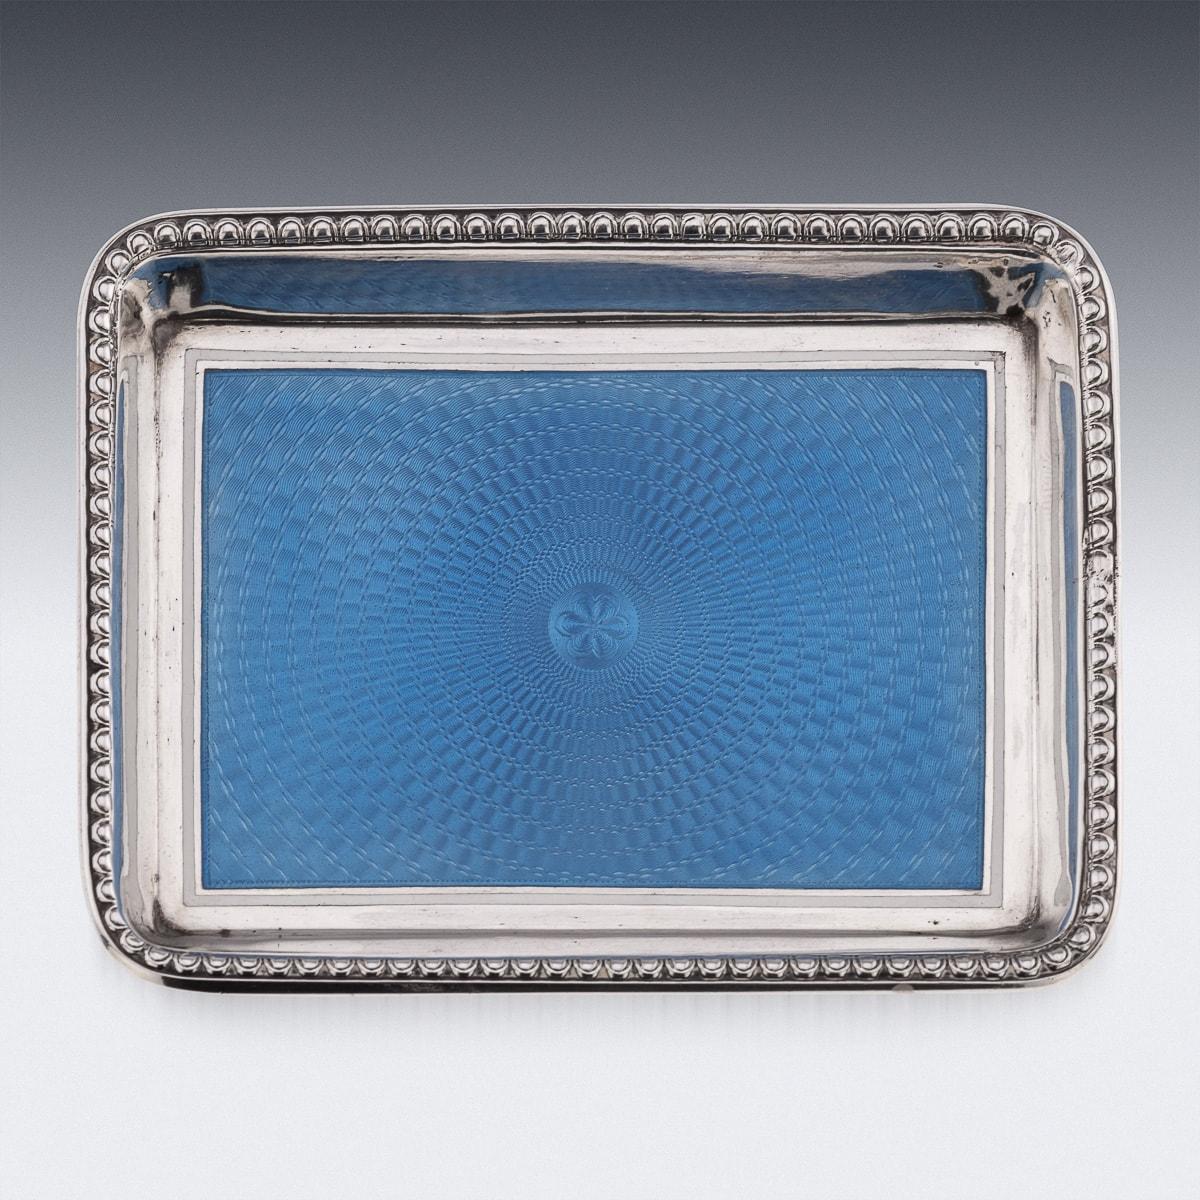 English Antique 20th Century Art Deco Solid Silver & Enamel Tray, London c.1919 For Sale